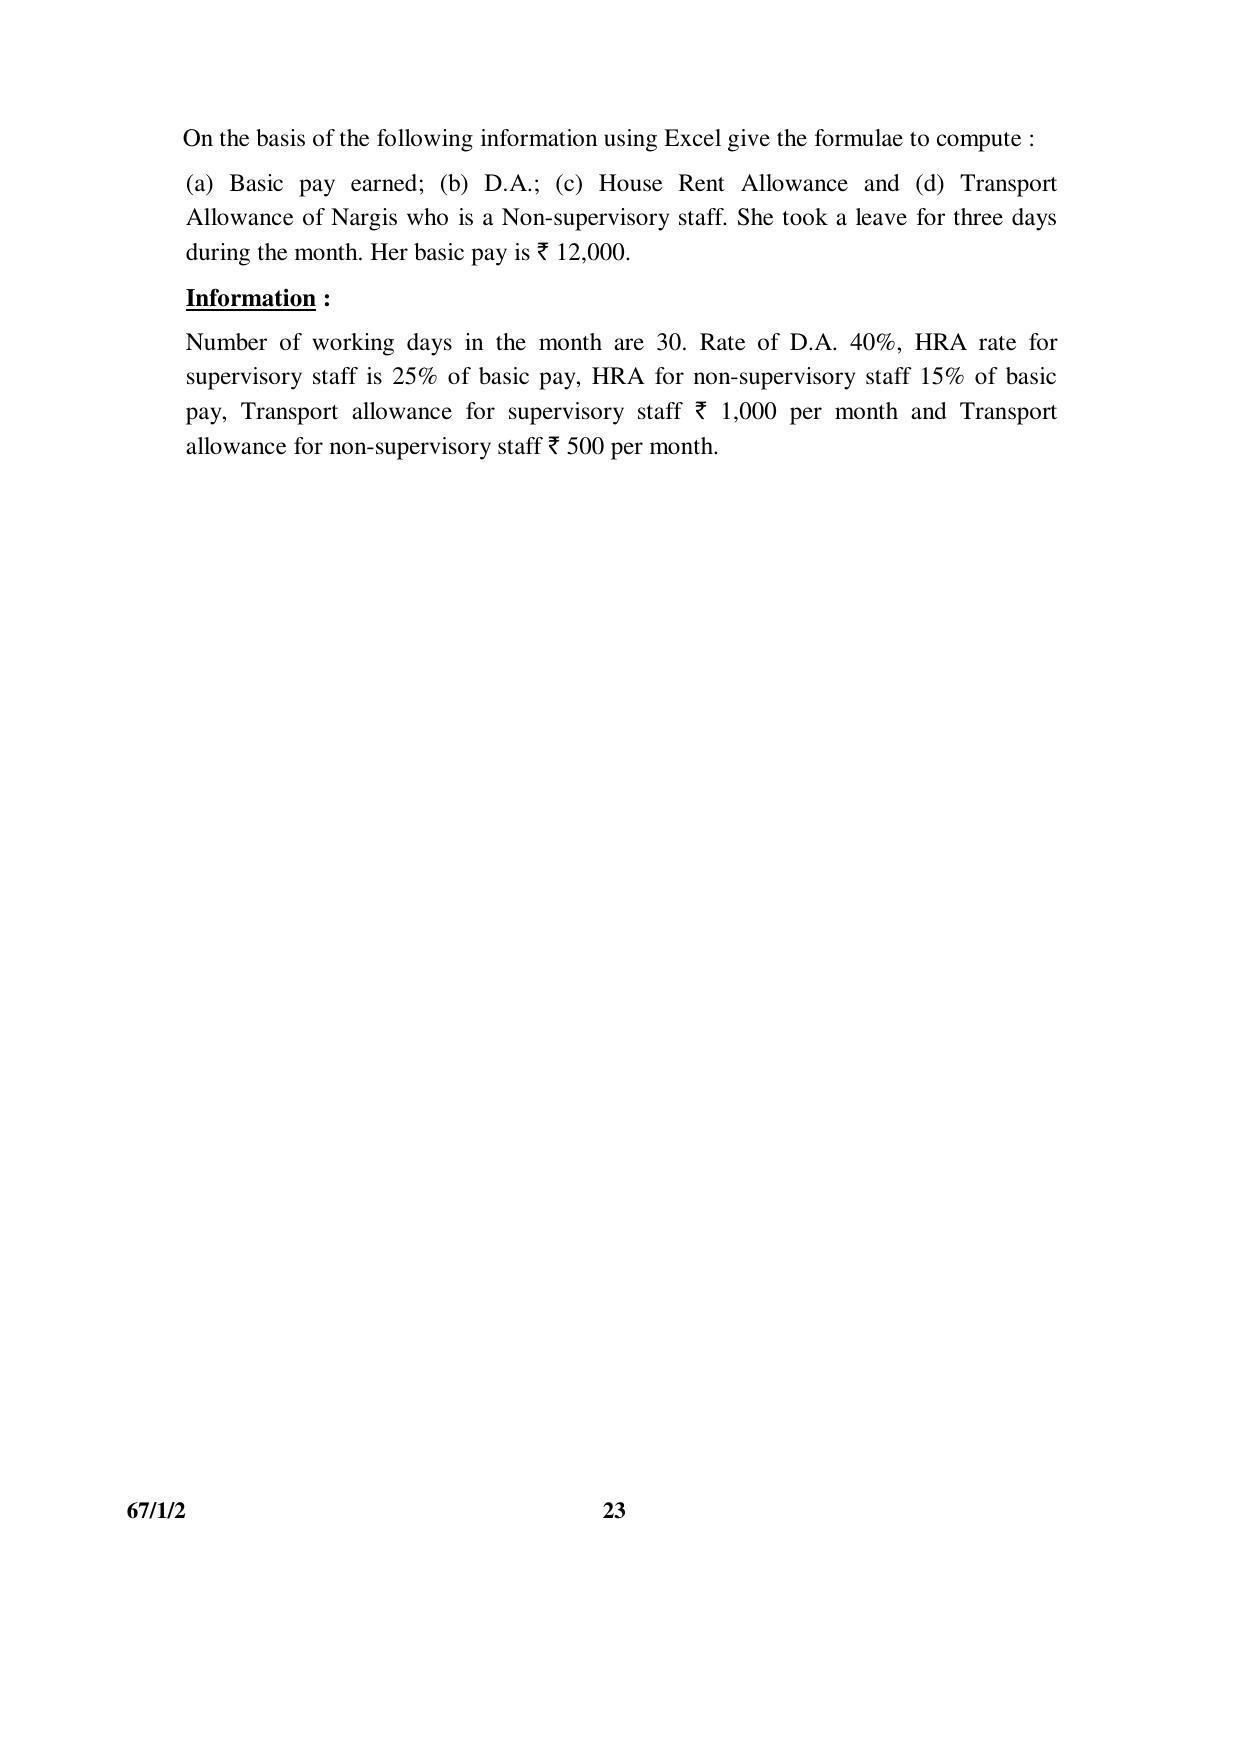 CBSE Class 12 67-1-2 ACCOUNTANCY 2016 Question Paper - Page 23